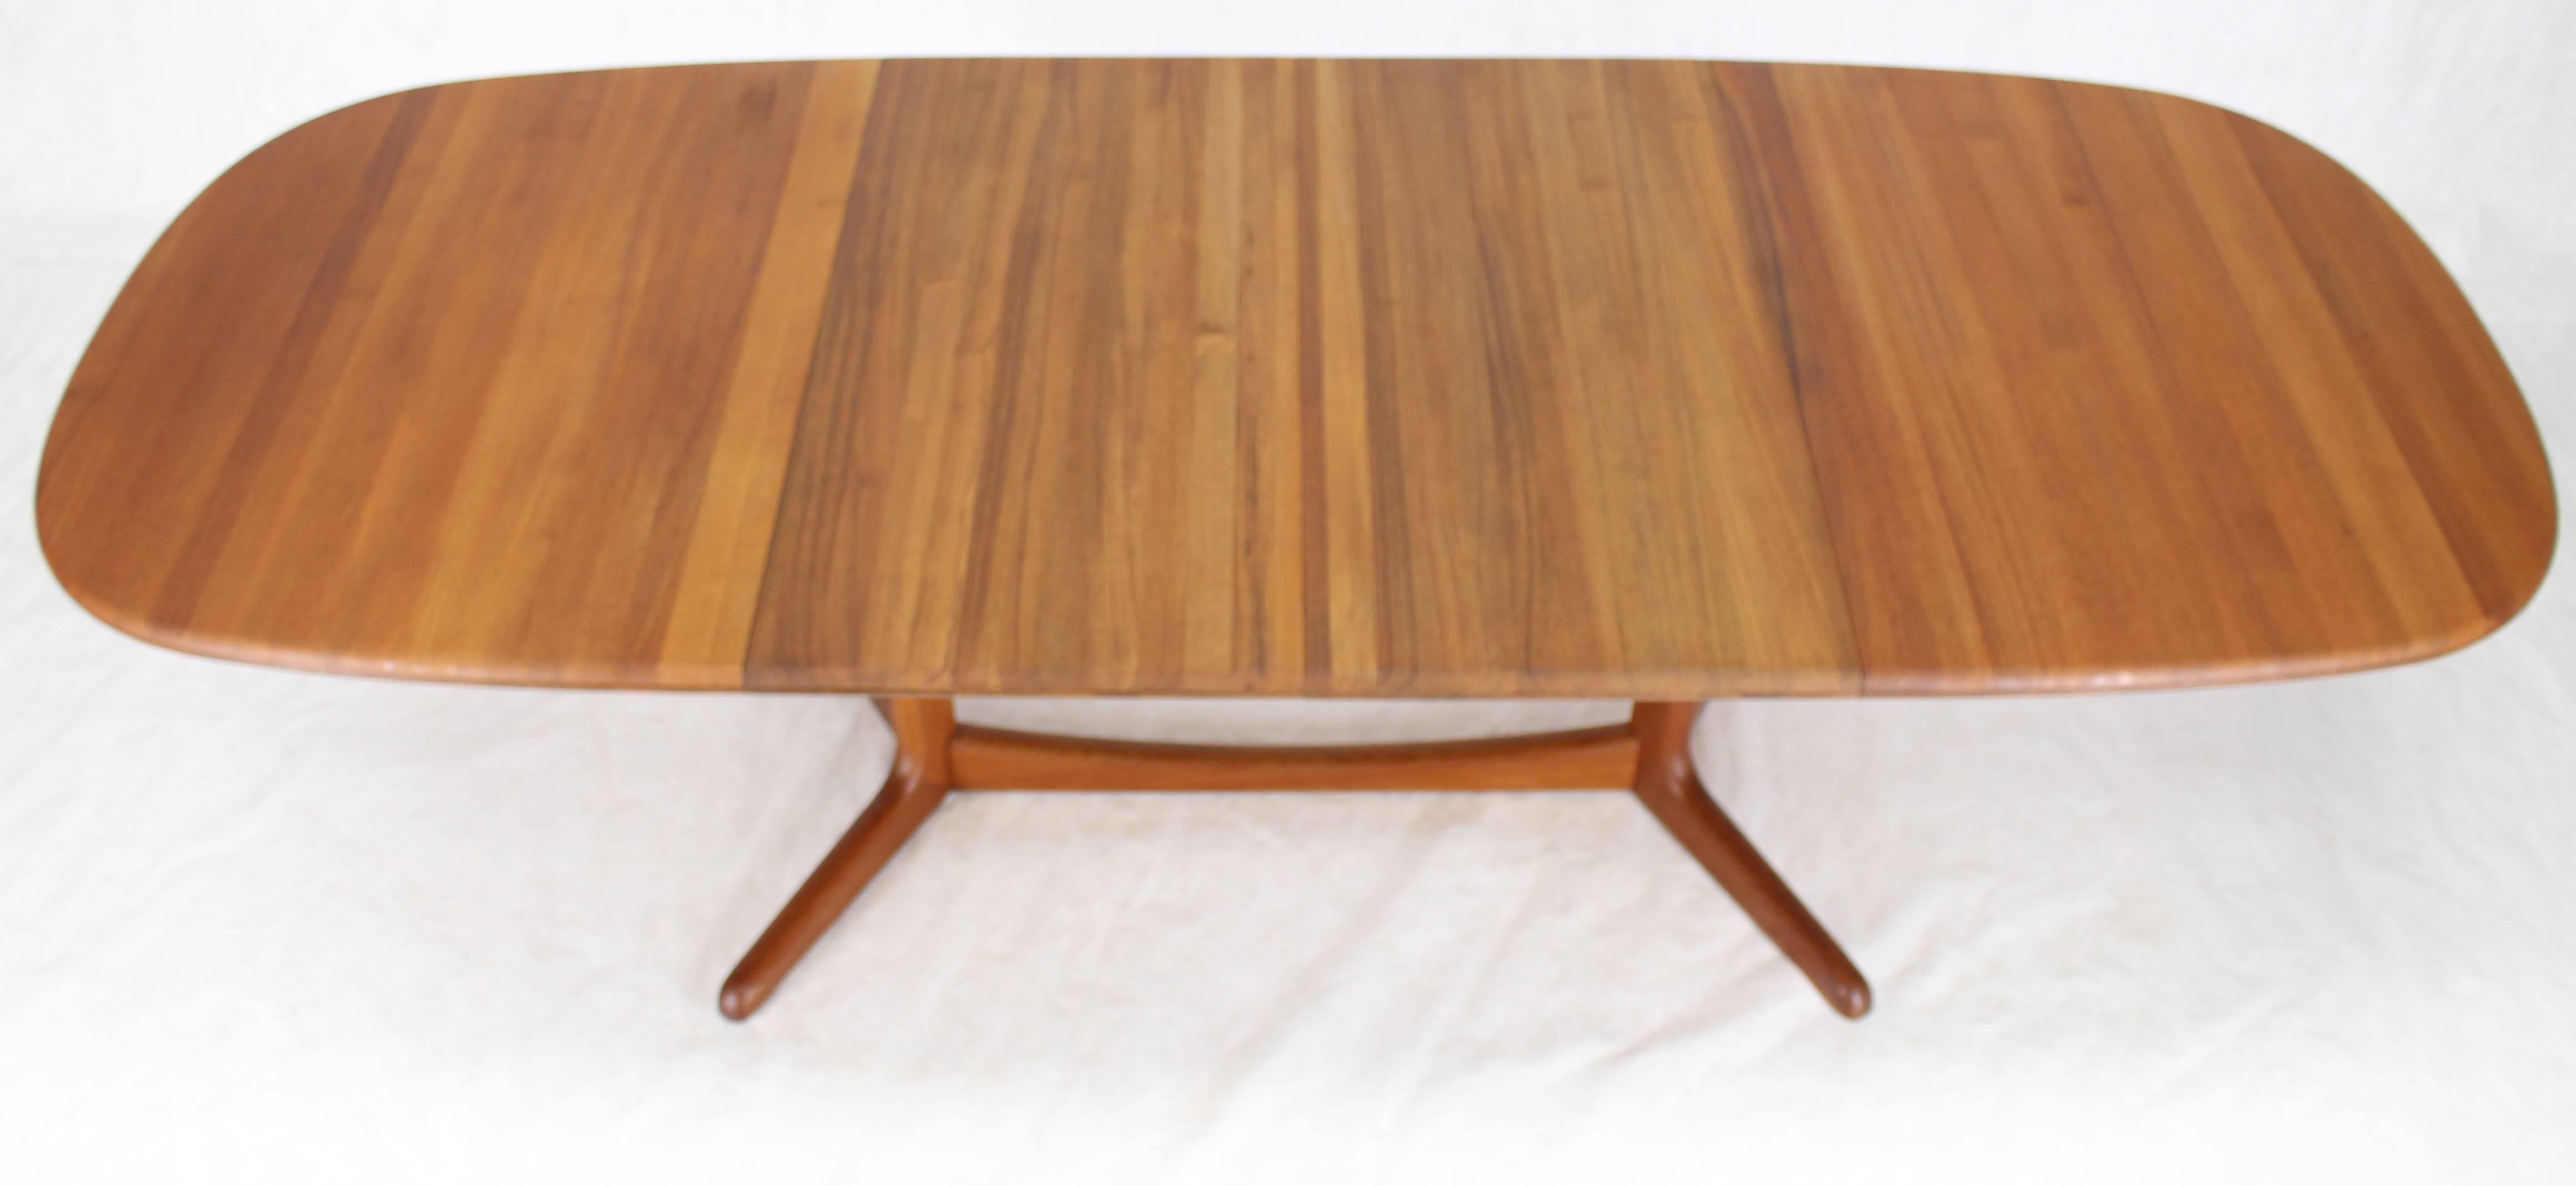 Solid Teak Danish Mid-Century Modern Dining Table with Two Leafs 3